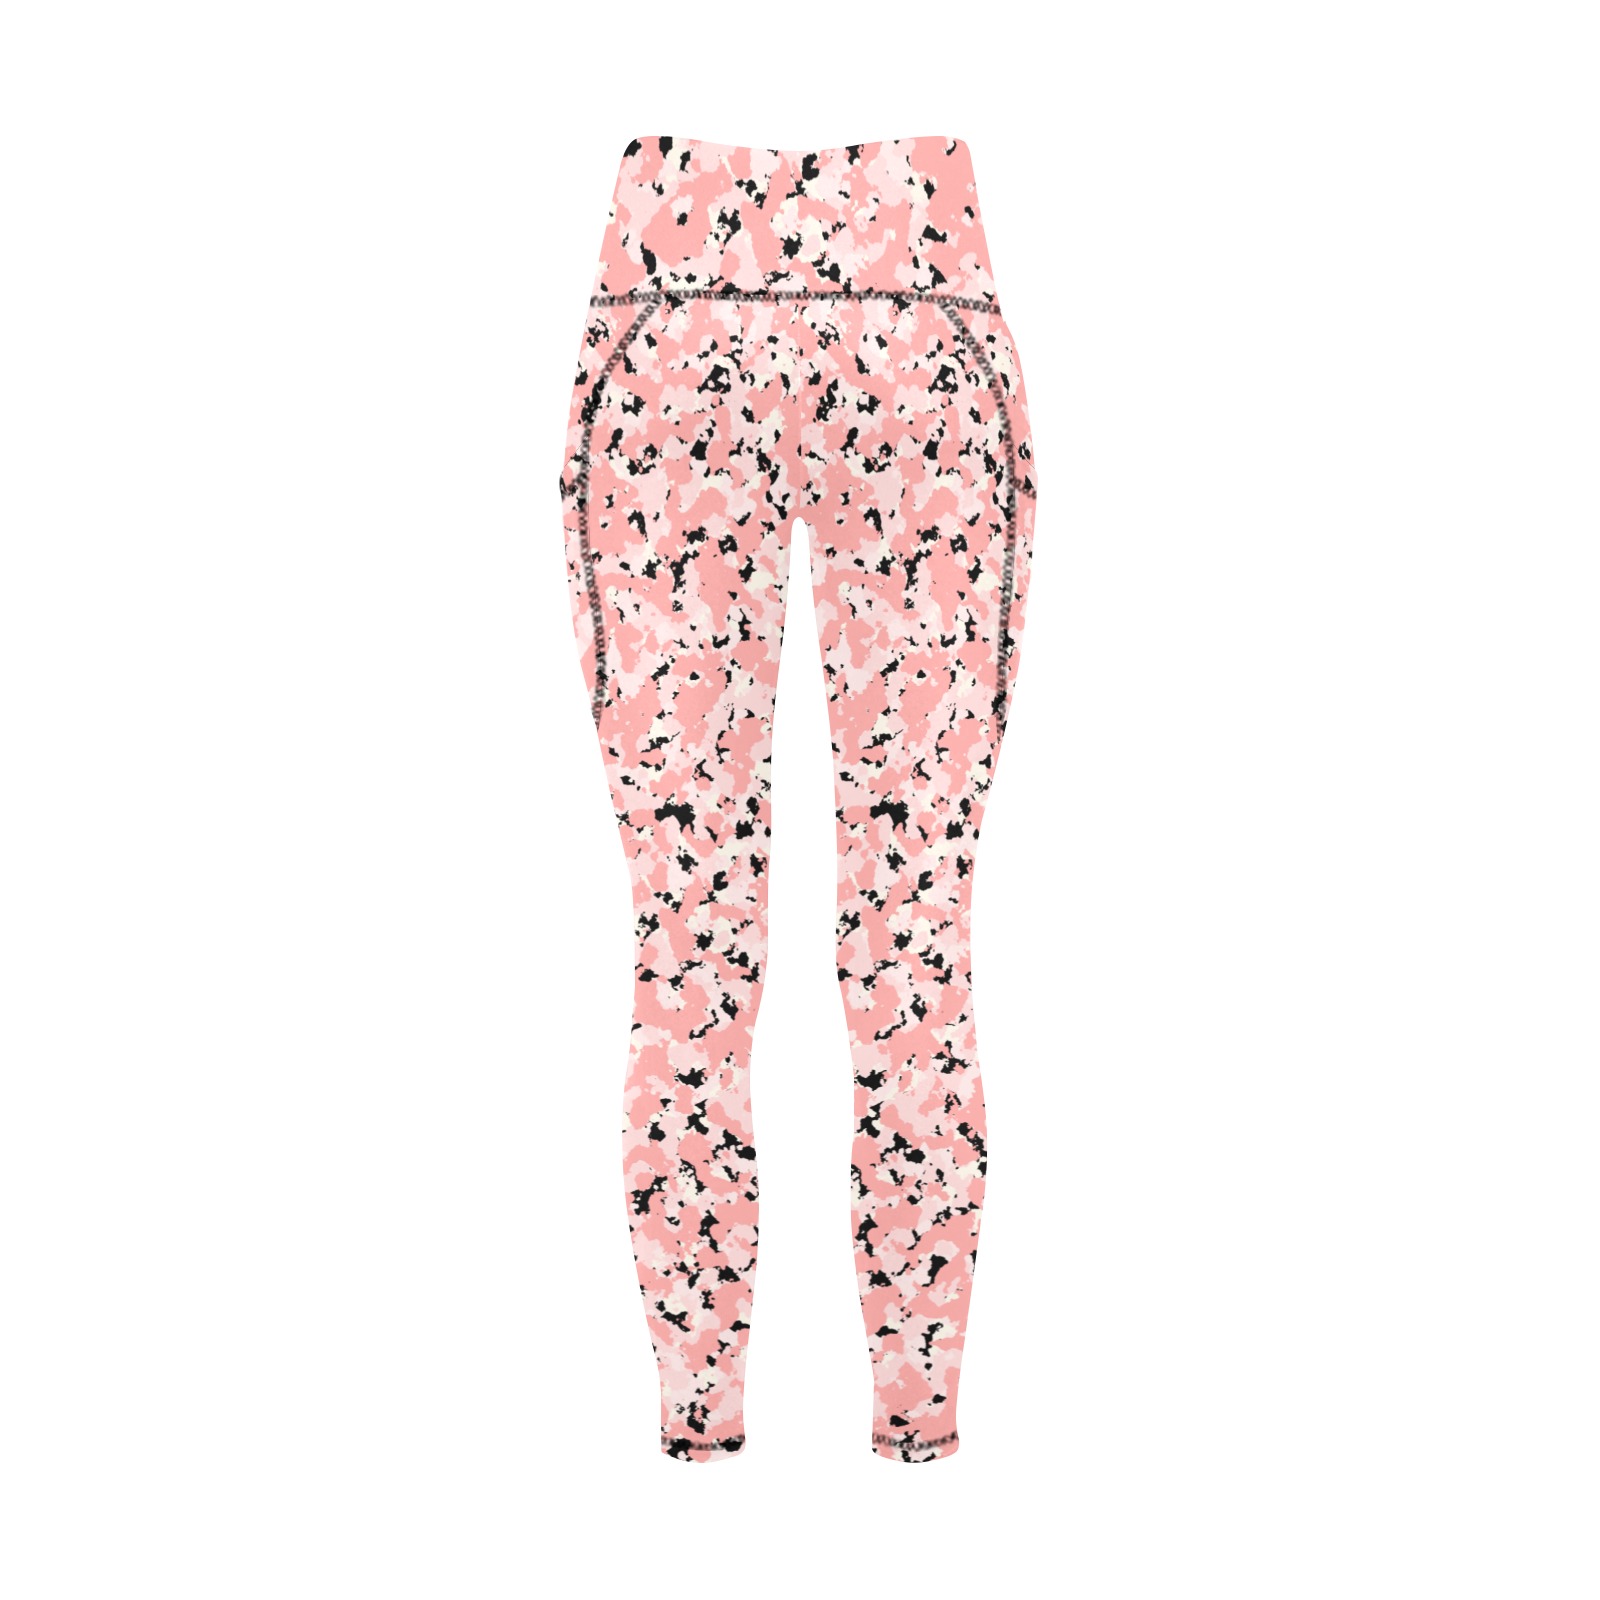 A5E659F6-0FE4-4DEE-A2B8-E6EE20B88075 Women's All Over Print Leggings with Pockets (Model L56)